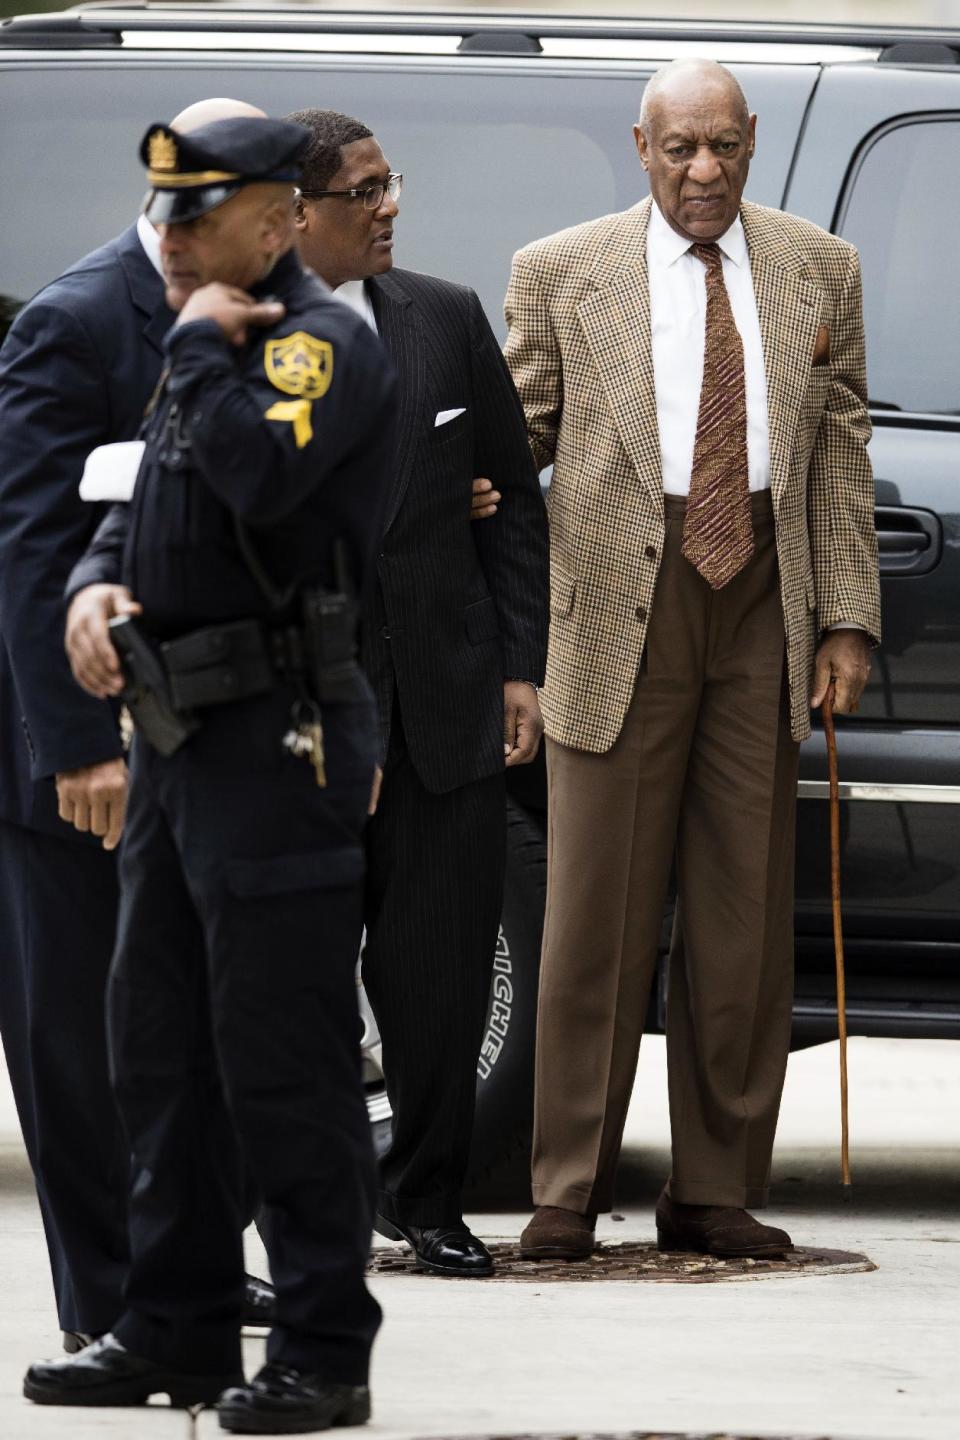 Bill Cosby arrives for a pretrial hearing in his sexual assault case at the Montgomery County Courthouse in Norristown, Pa., Tuesday, Dec. 13, 2016. Lawyers for Cosby will battle in court to try to limit the number of other accusers who can testify at the comedian's sexual assault trial. (AP Photo/Matt Rourke)